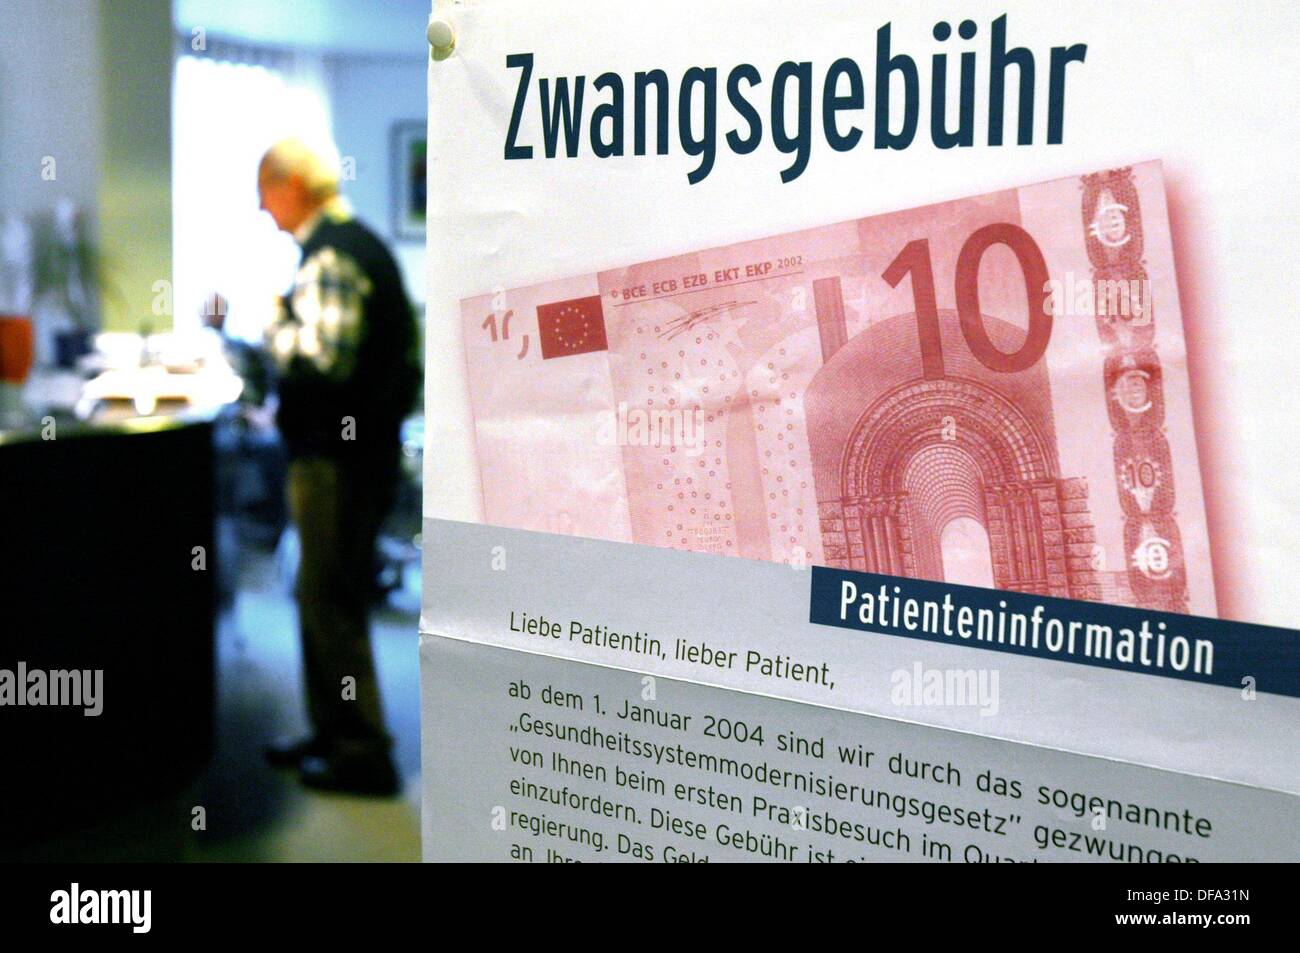 An information sheet for patients explains the practice charge which was introduced on 01 January 2004. The photo was taken in an eye specialist's practice near Hannover on 02 December 2003. Stock Photo